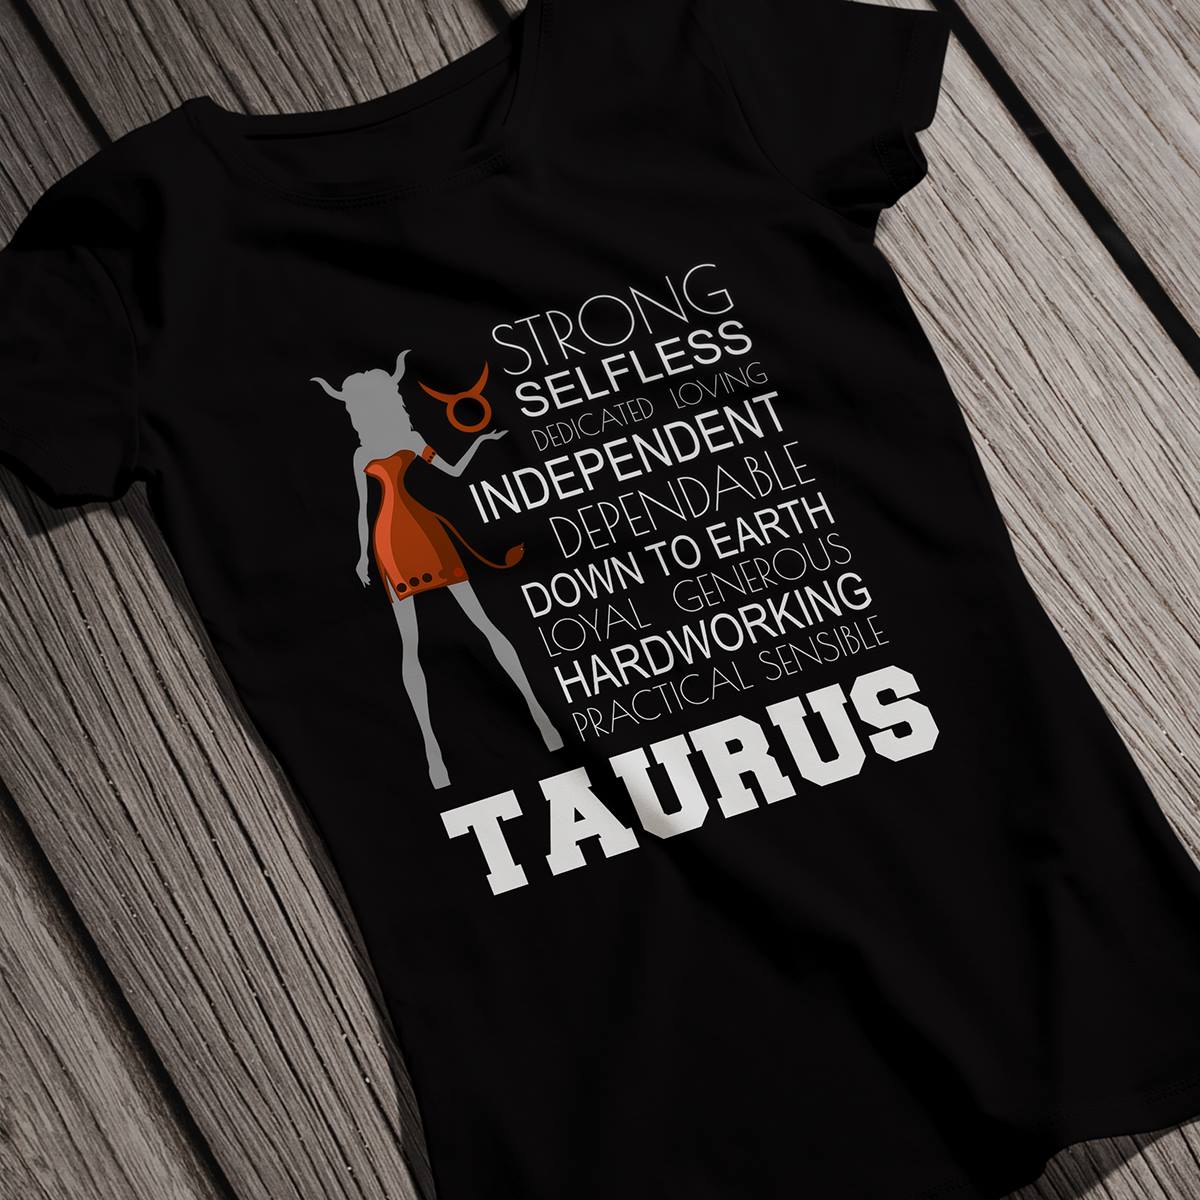 Taurus Shirt, Strong Selfless Dedicated Loving Independent Dependable Down To Earth